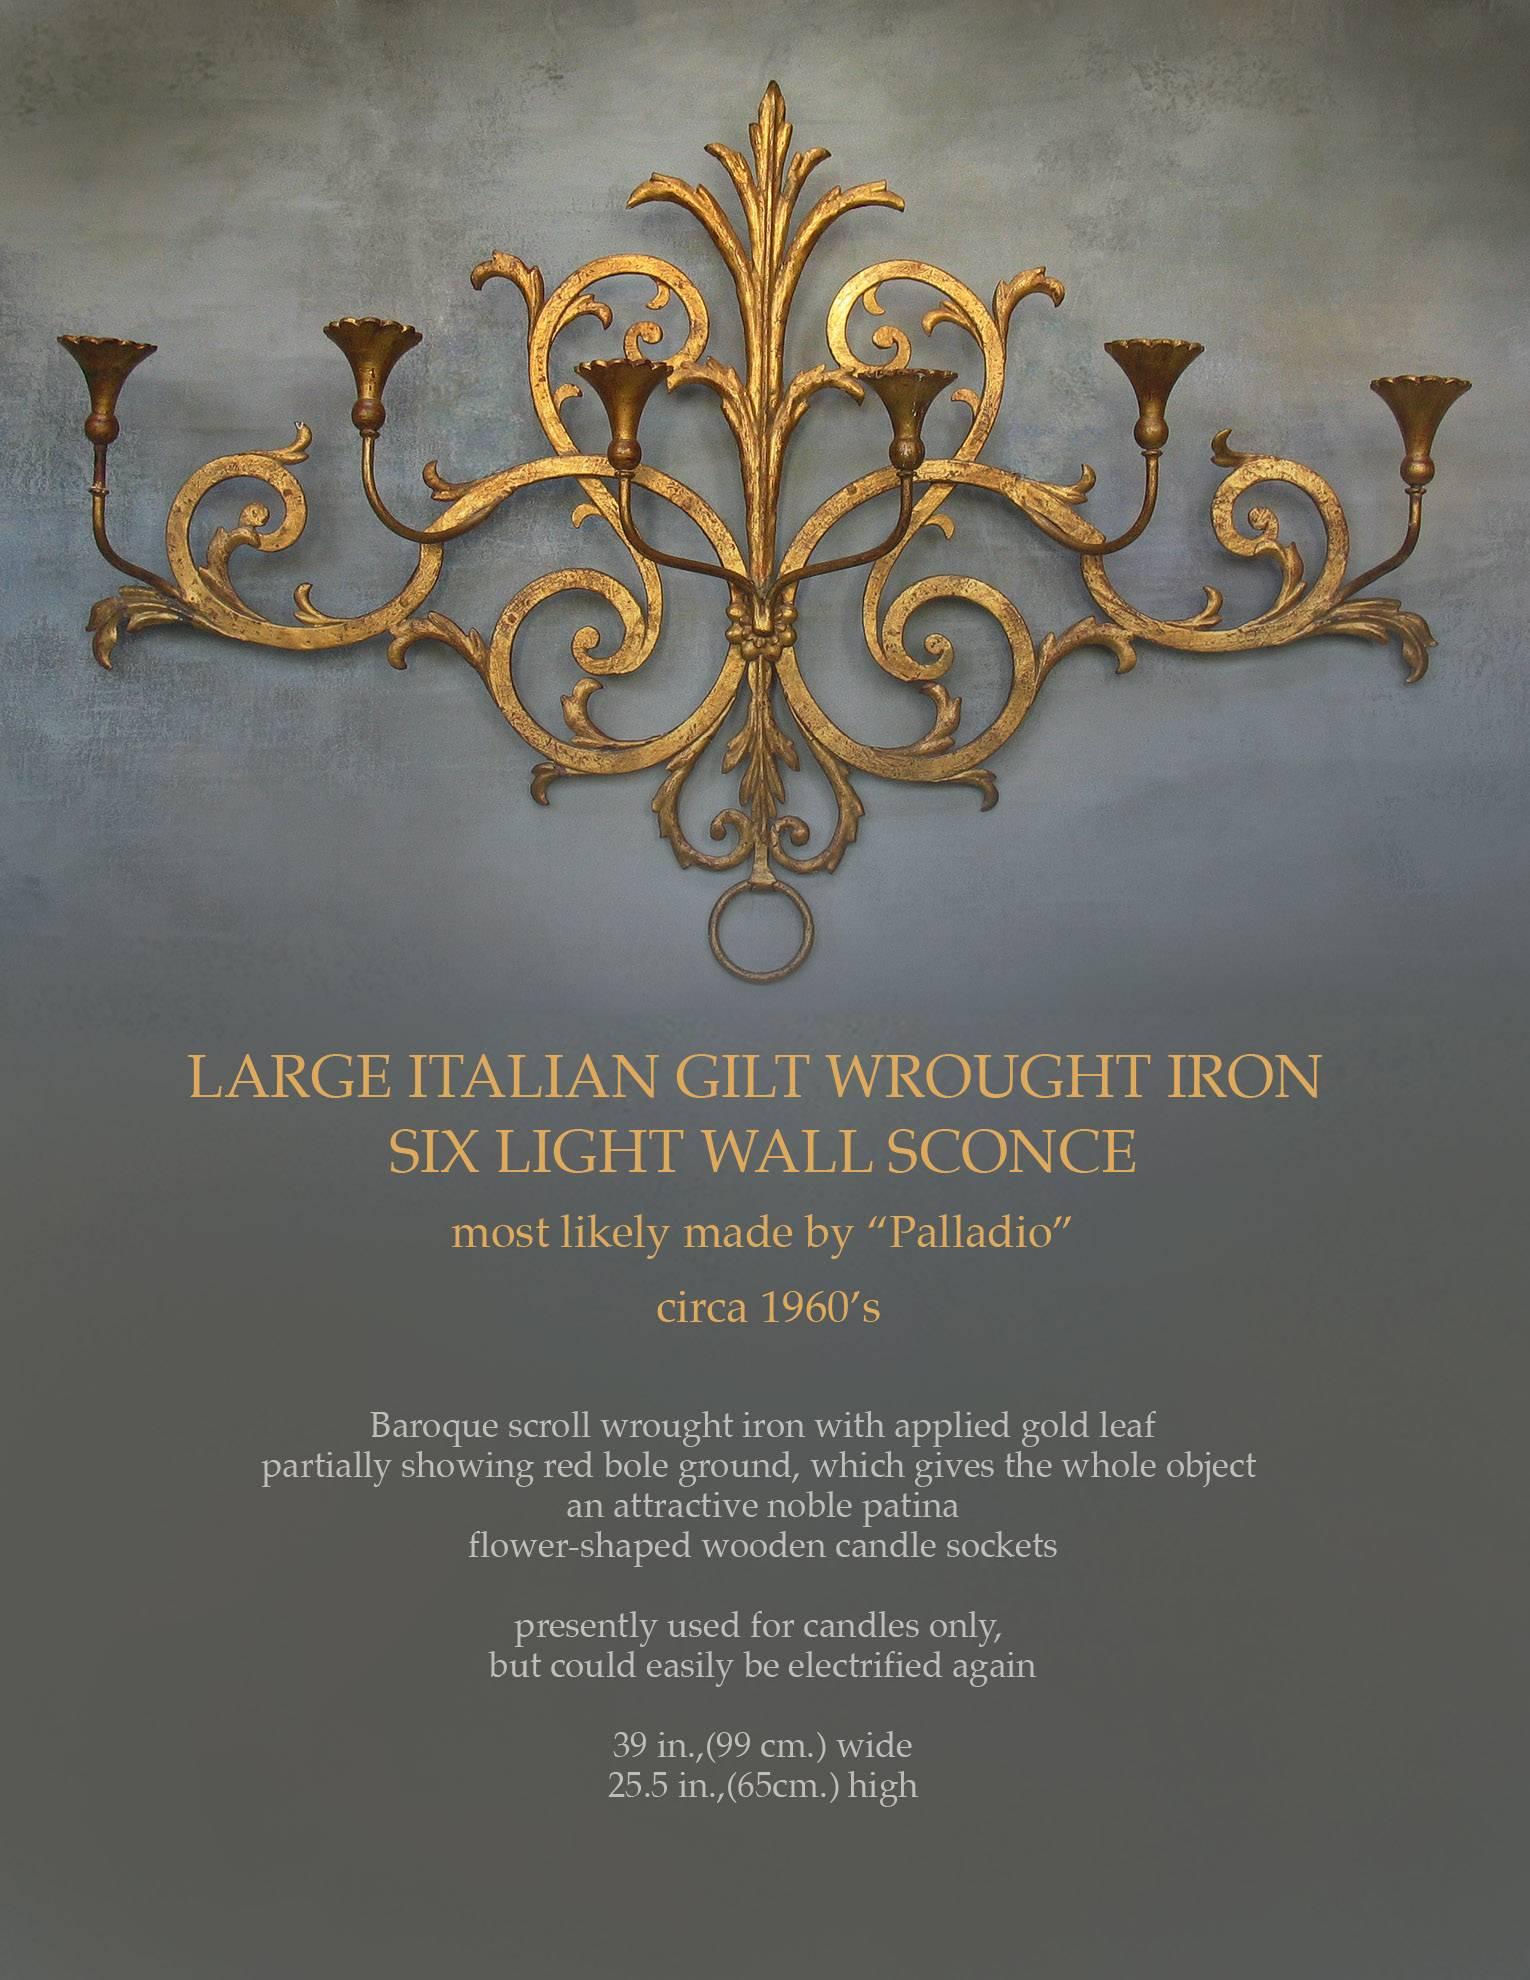 A large Italian gilt wrought iron six-light wall candle sconce, most likely made by 